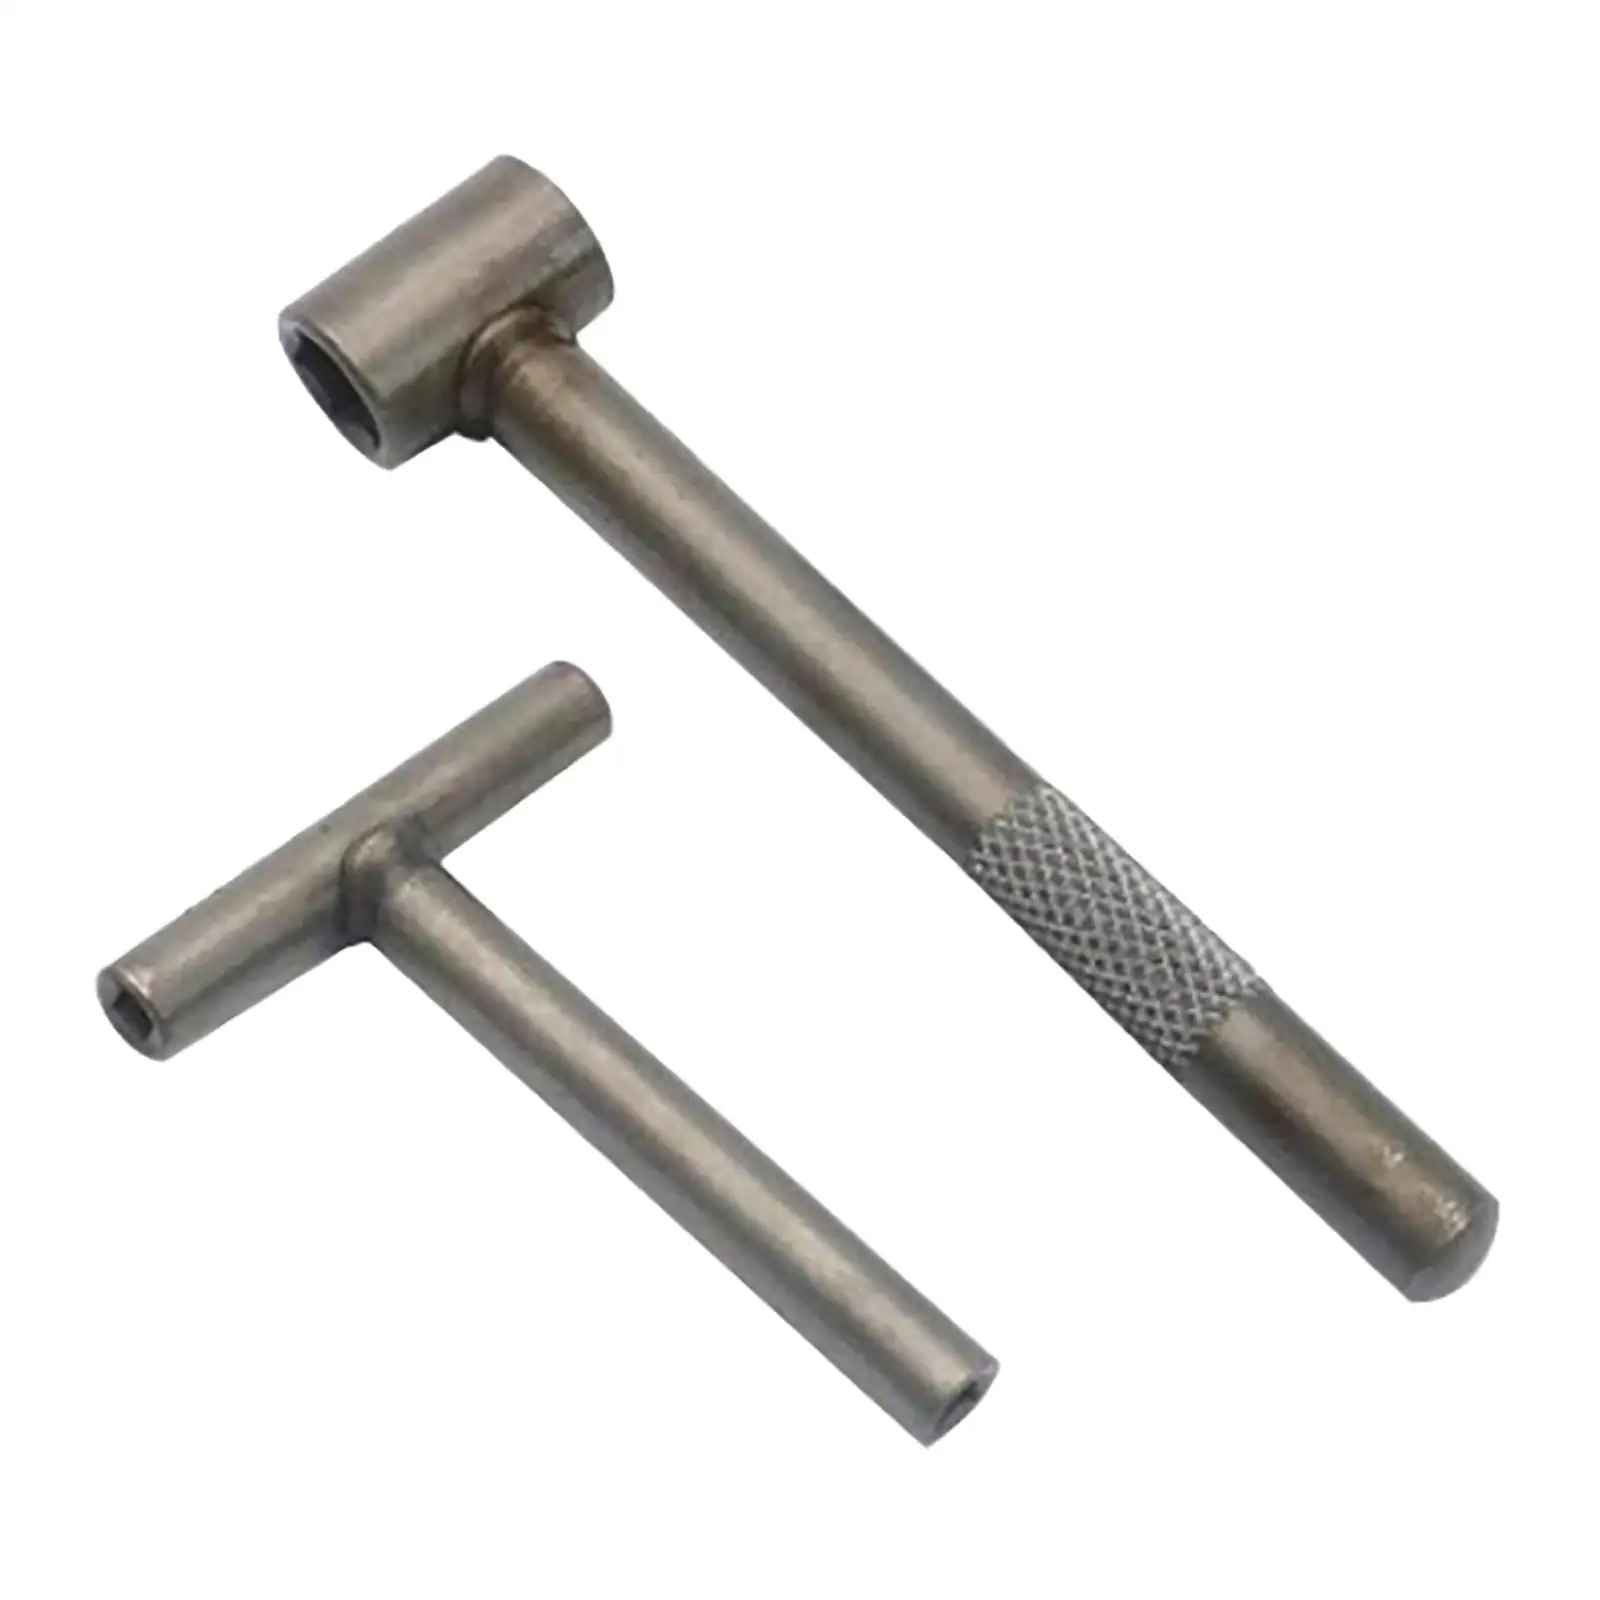 Valve Tappet Adjustment Tool Square Hexagonal Hole Tool Carbon Steel Adjusting Spanner for Gy6 50 150cc Scooter Motorcycle